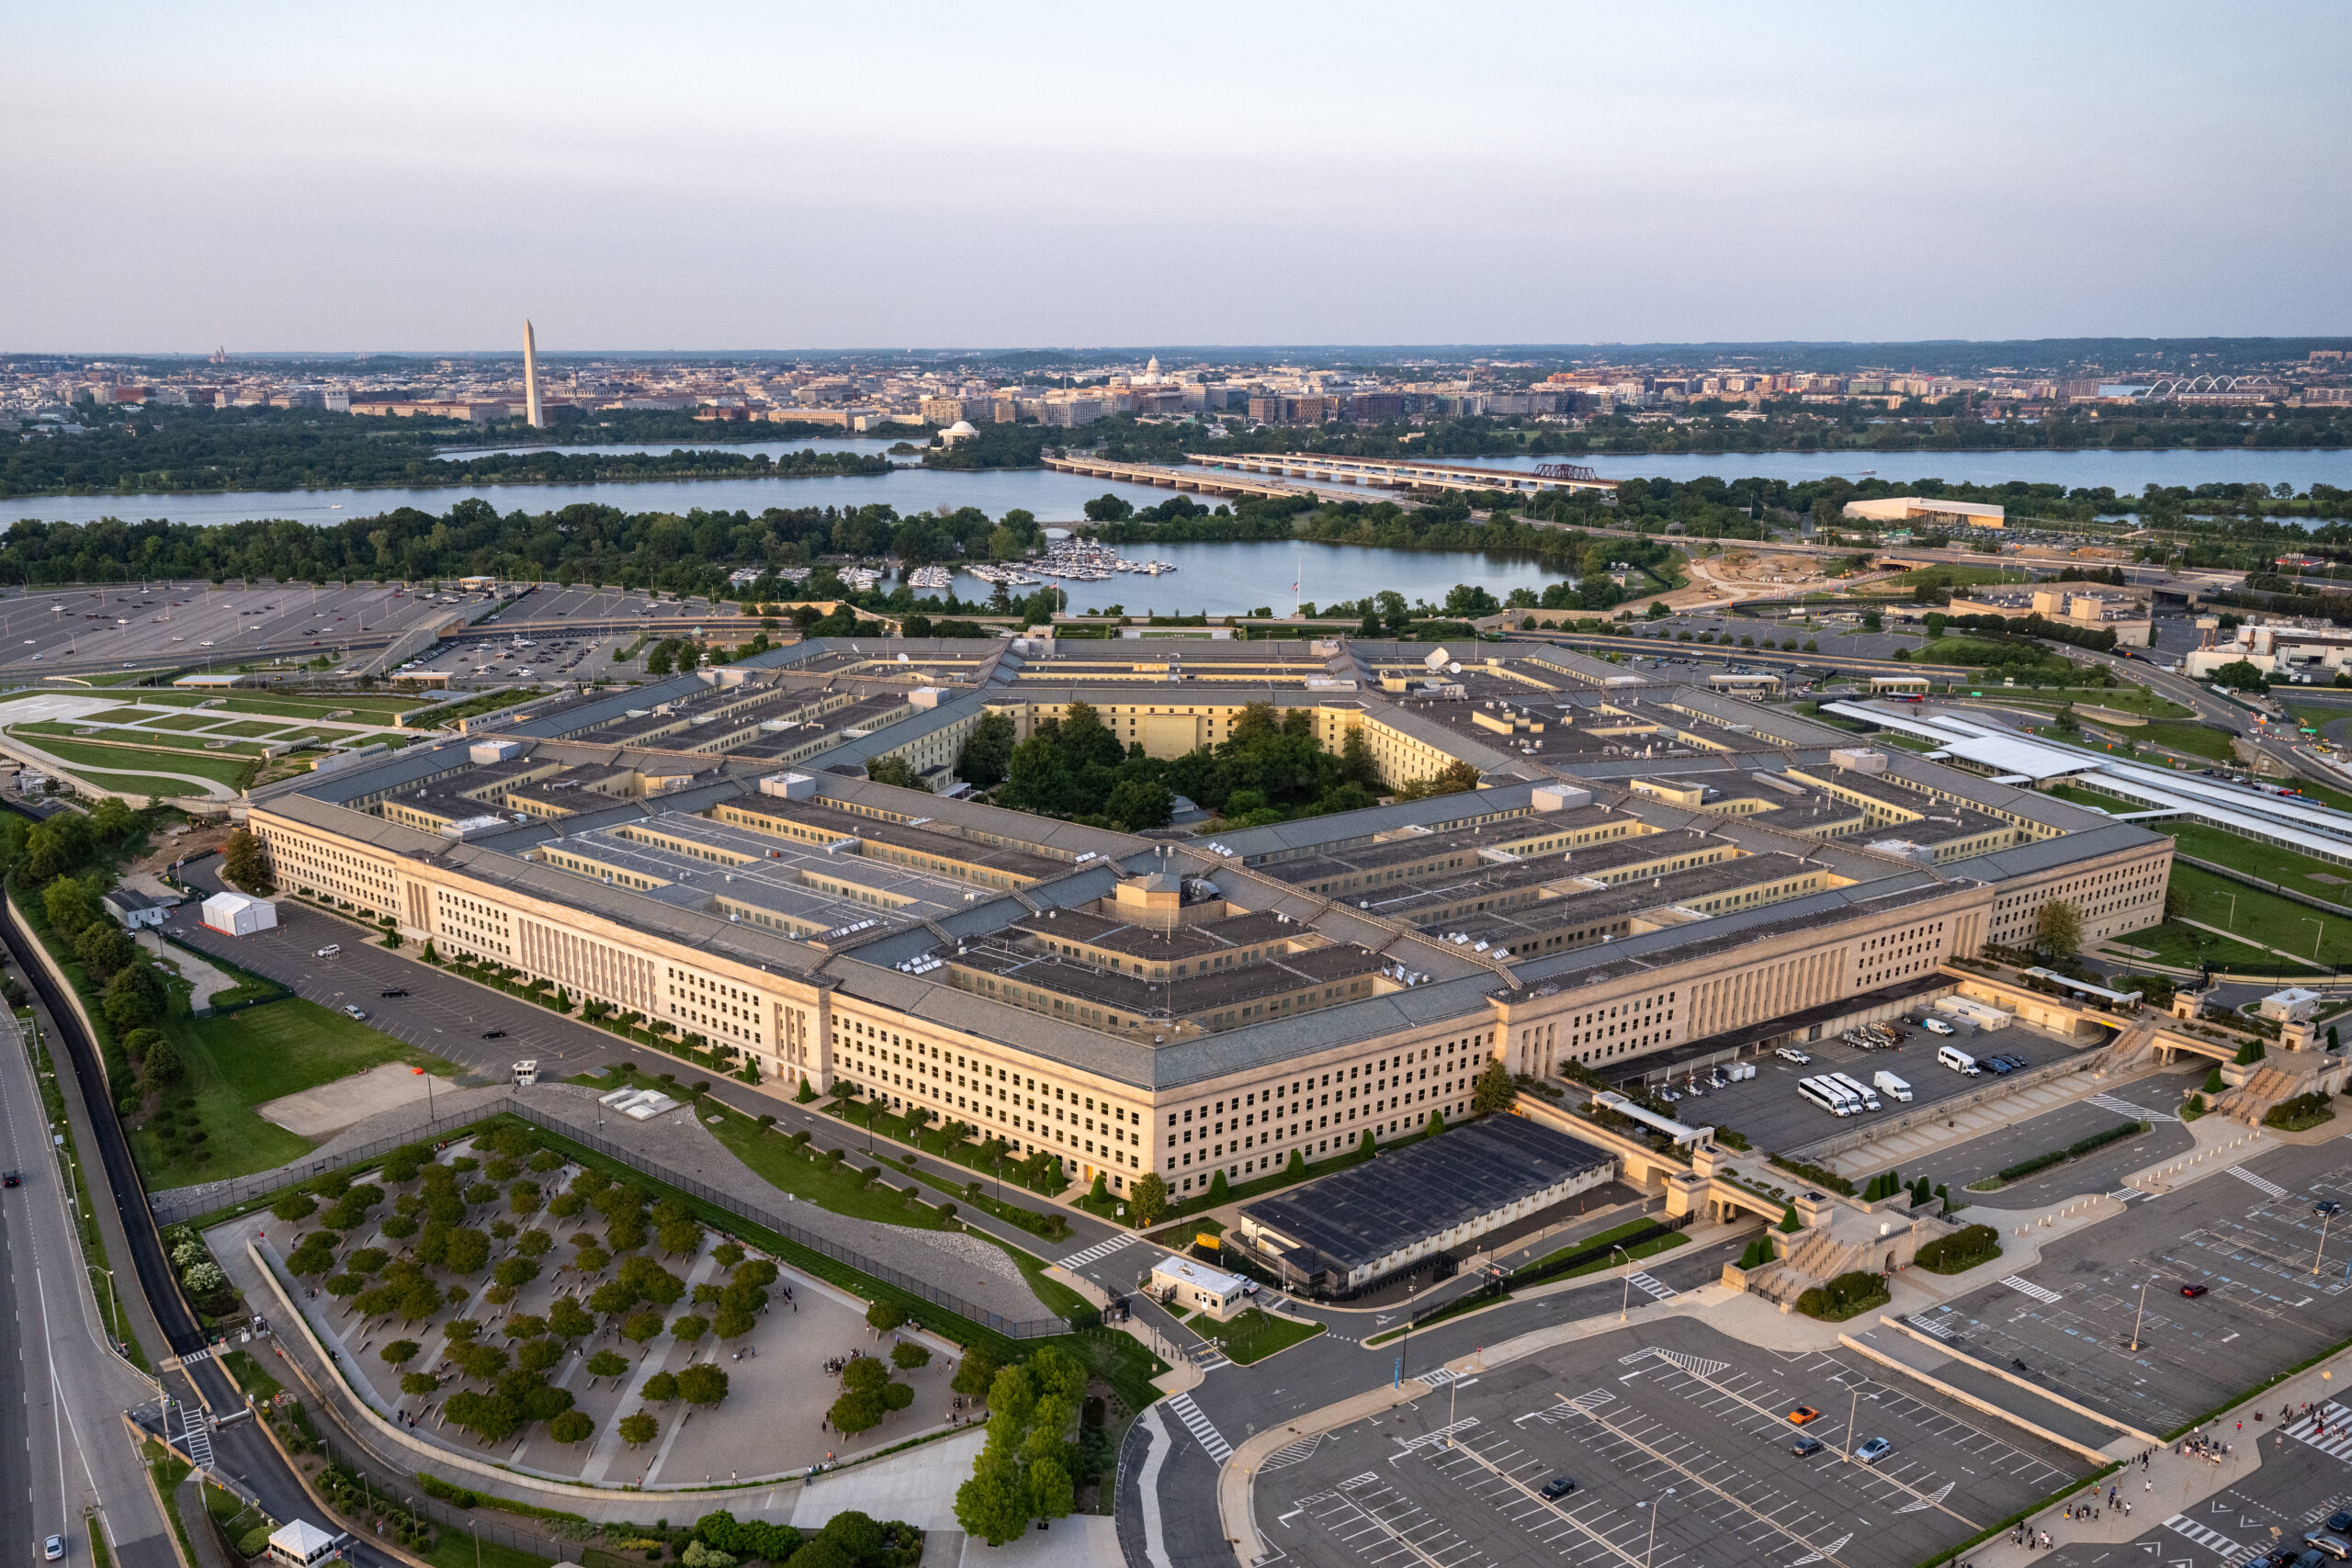 Pentagon from the air